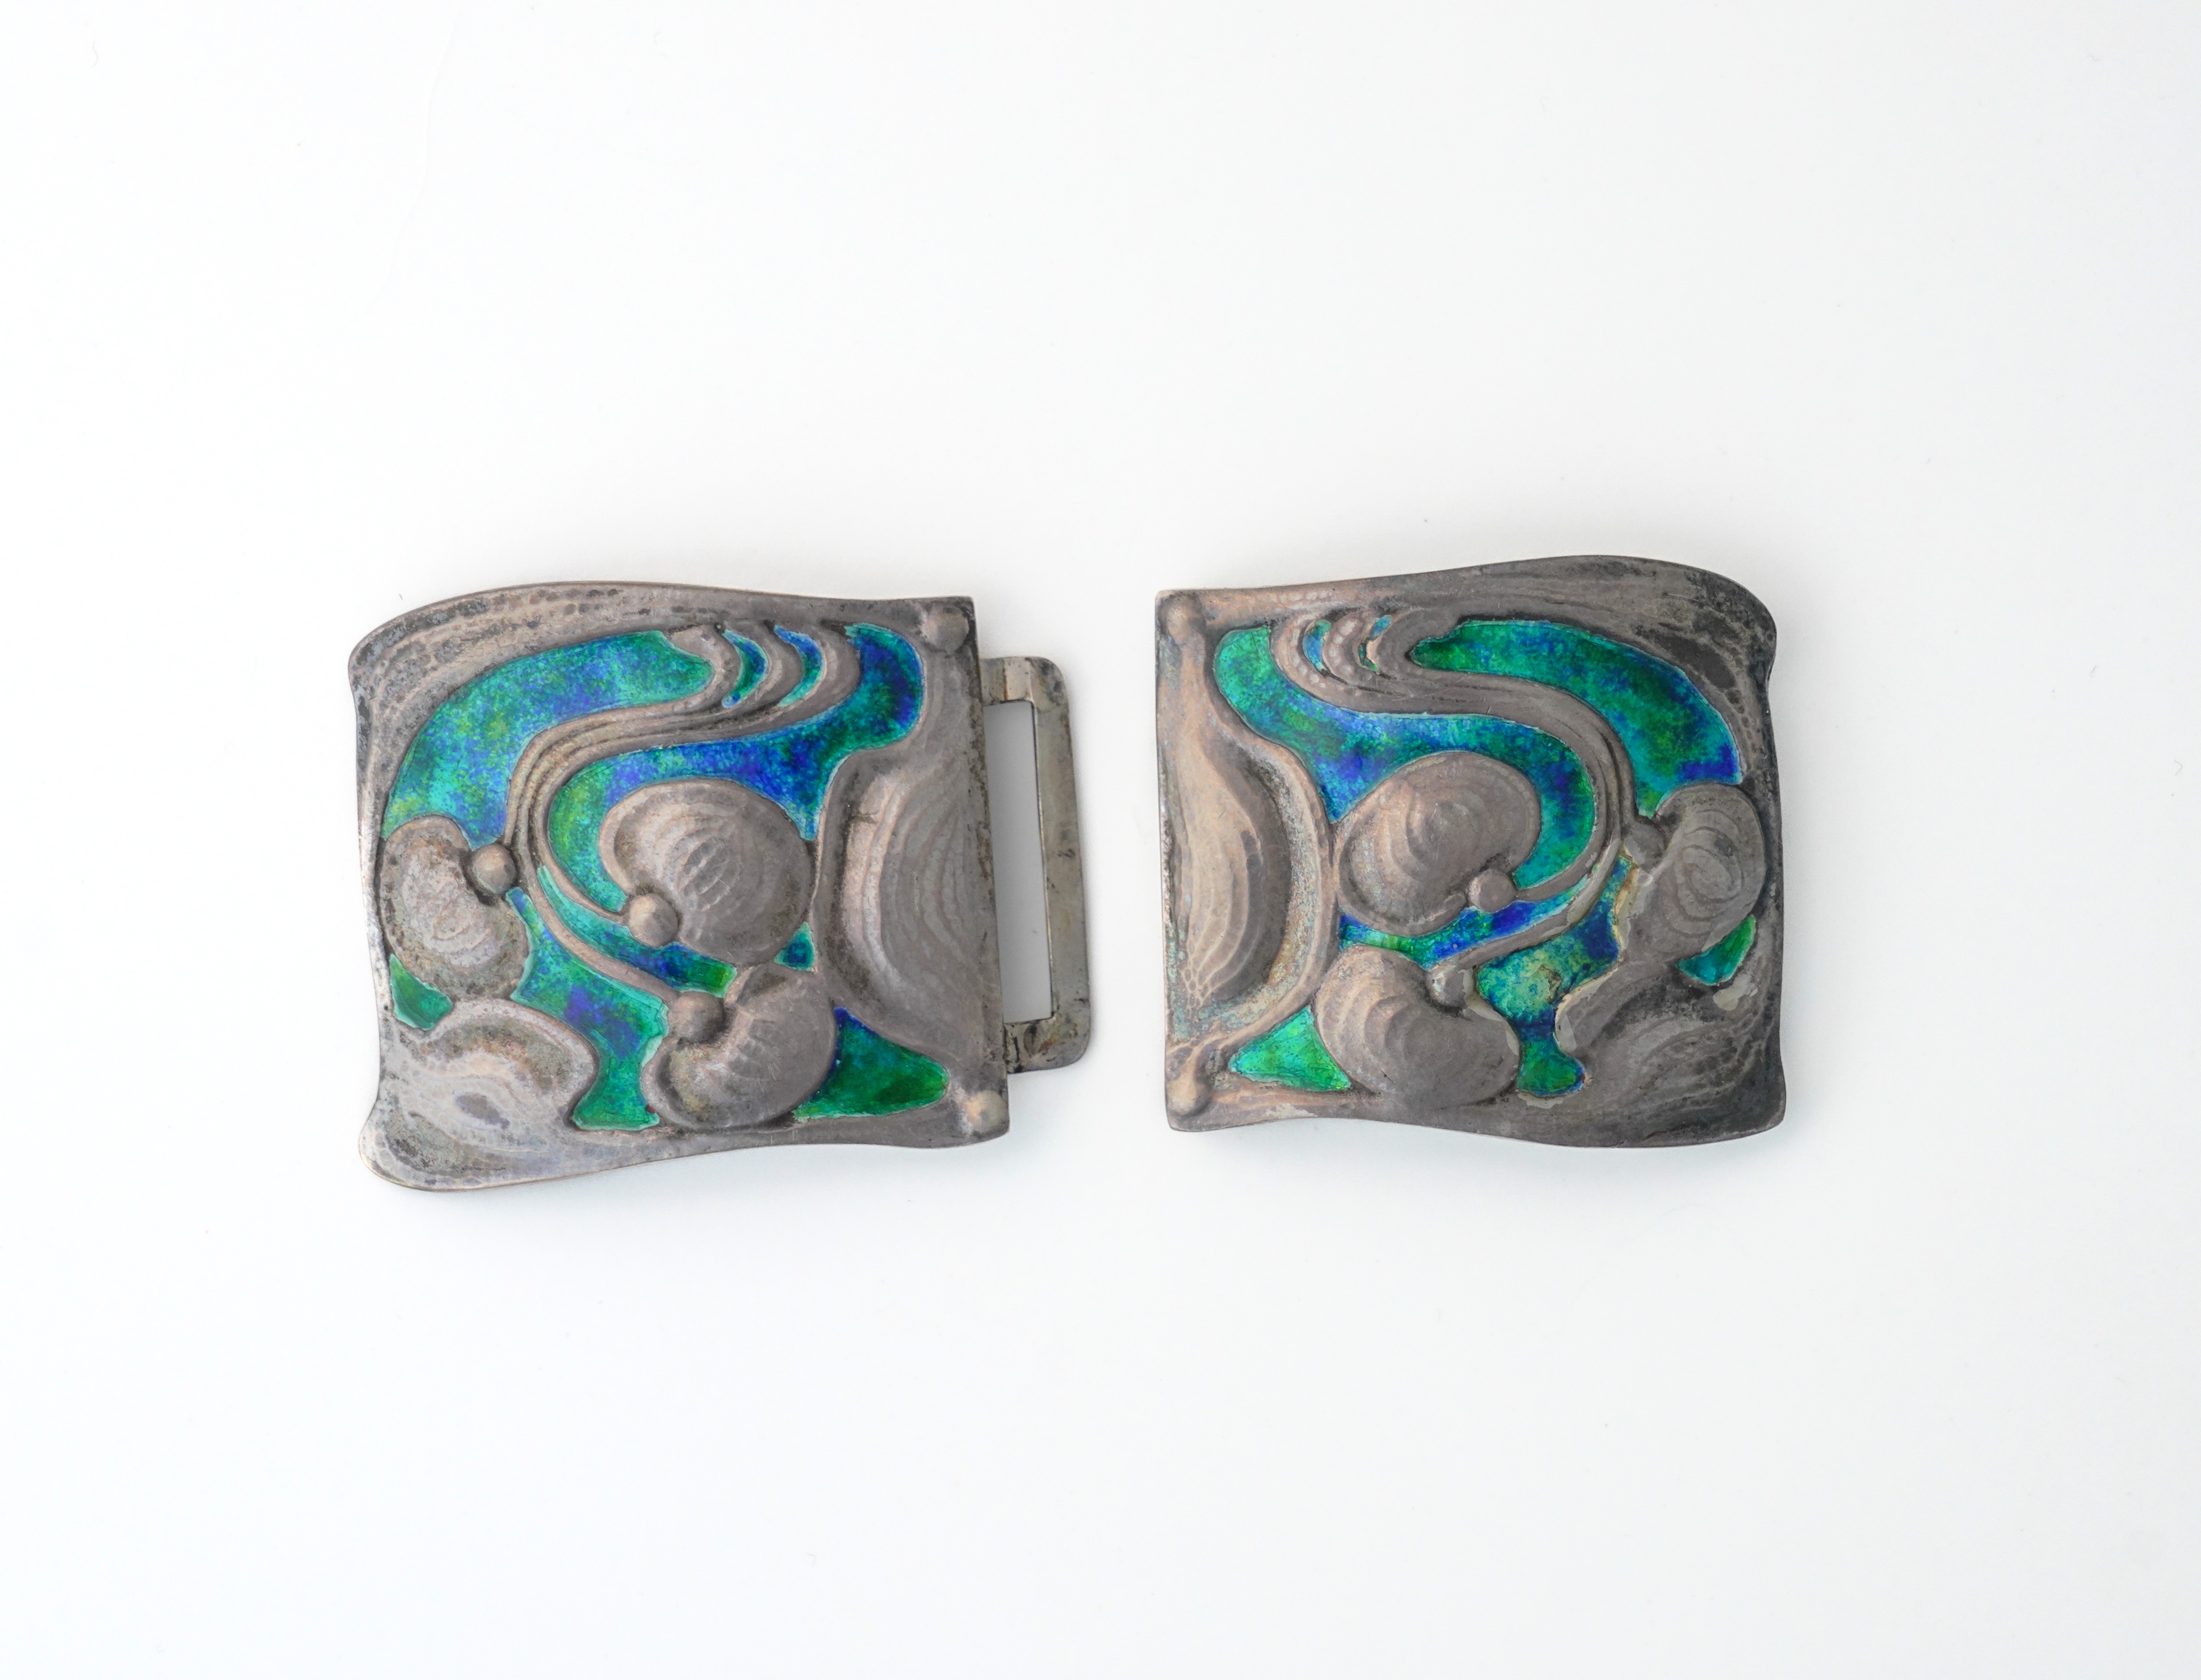 A SILVER AND ENAMELLED TWO PIECE ART NOUVEAU WAISTBELT BUCKLE - Image 2 of 3